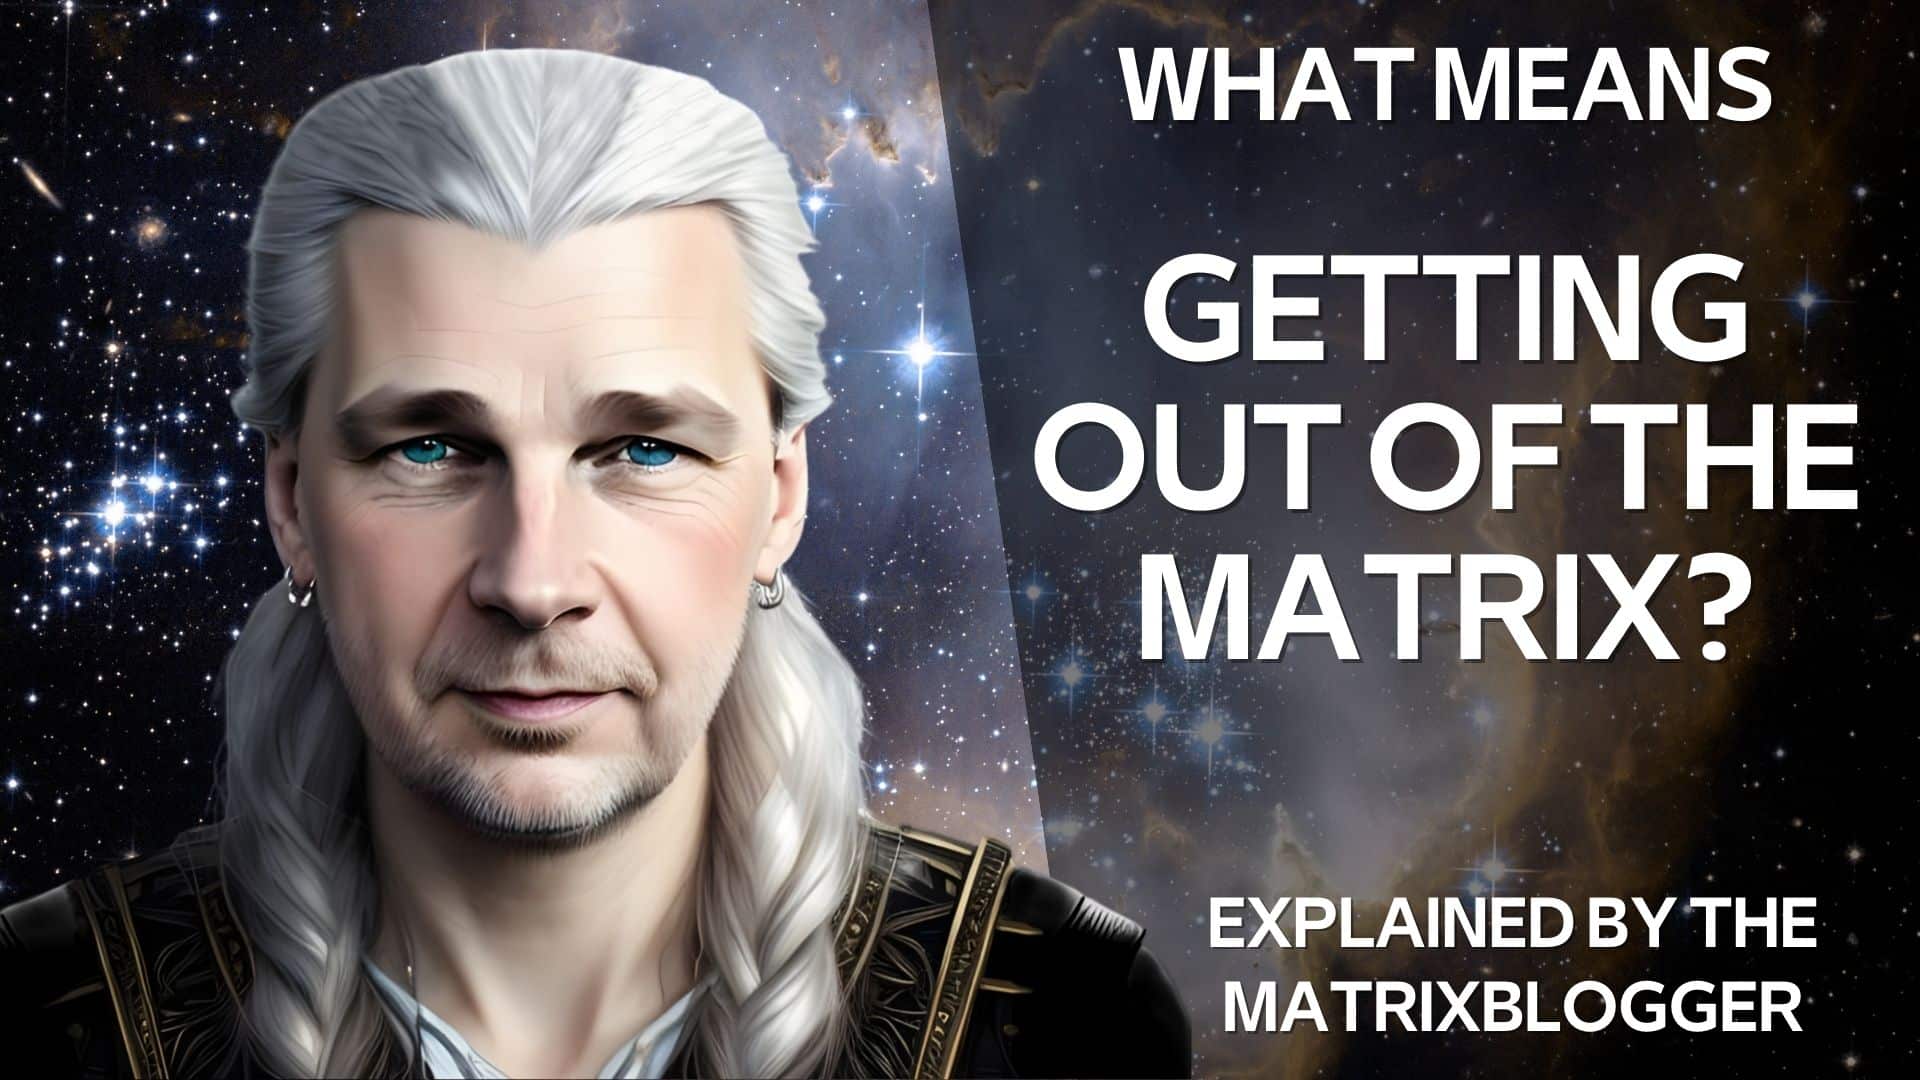 For spiritual beginners: What does Getting out of the Matrix mean?